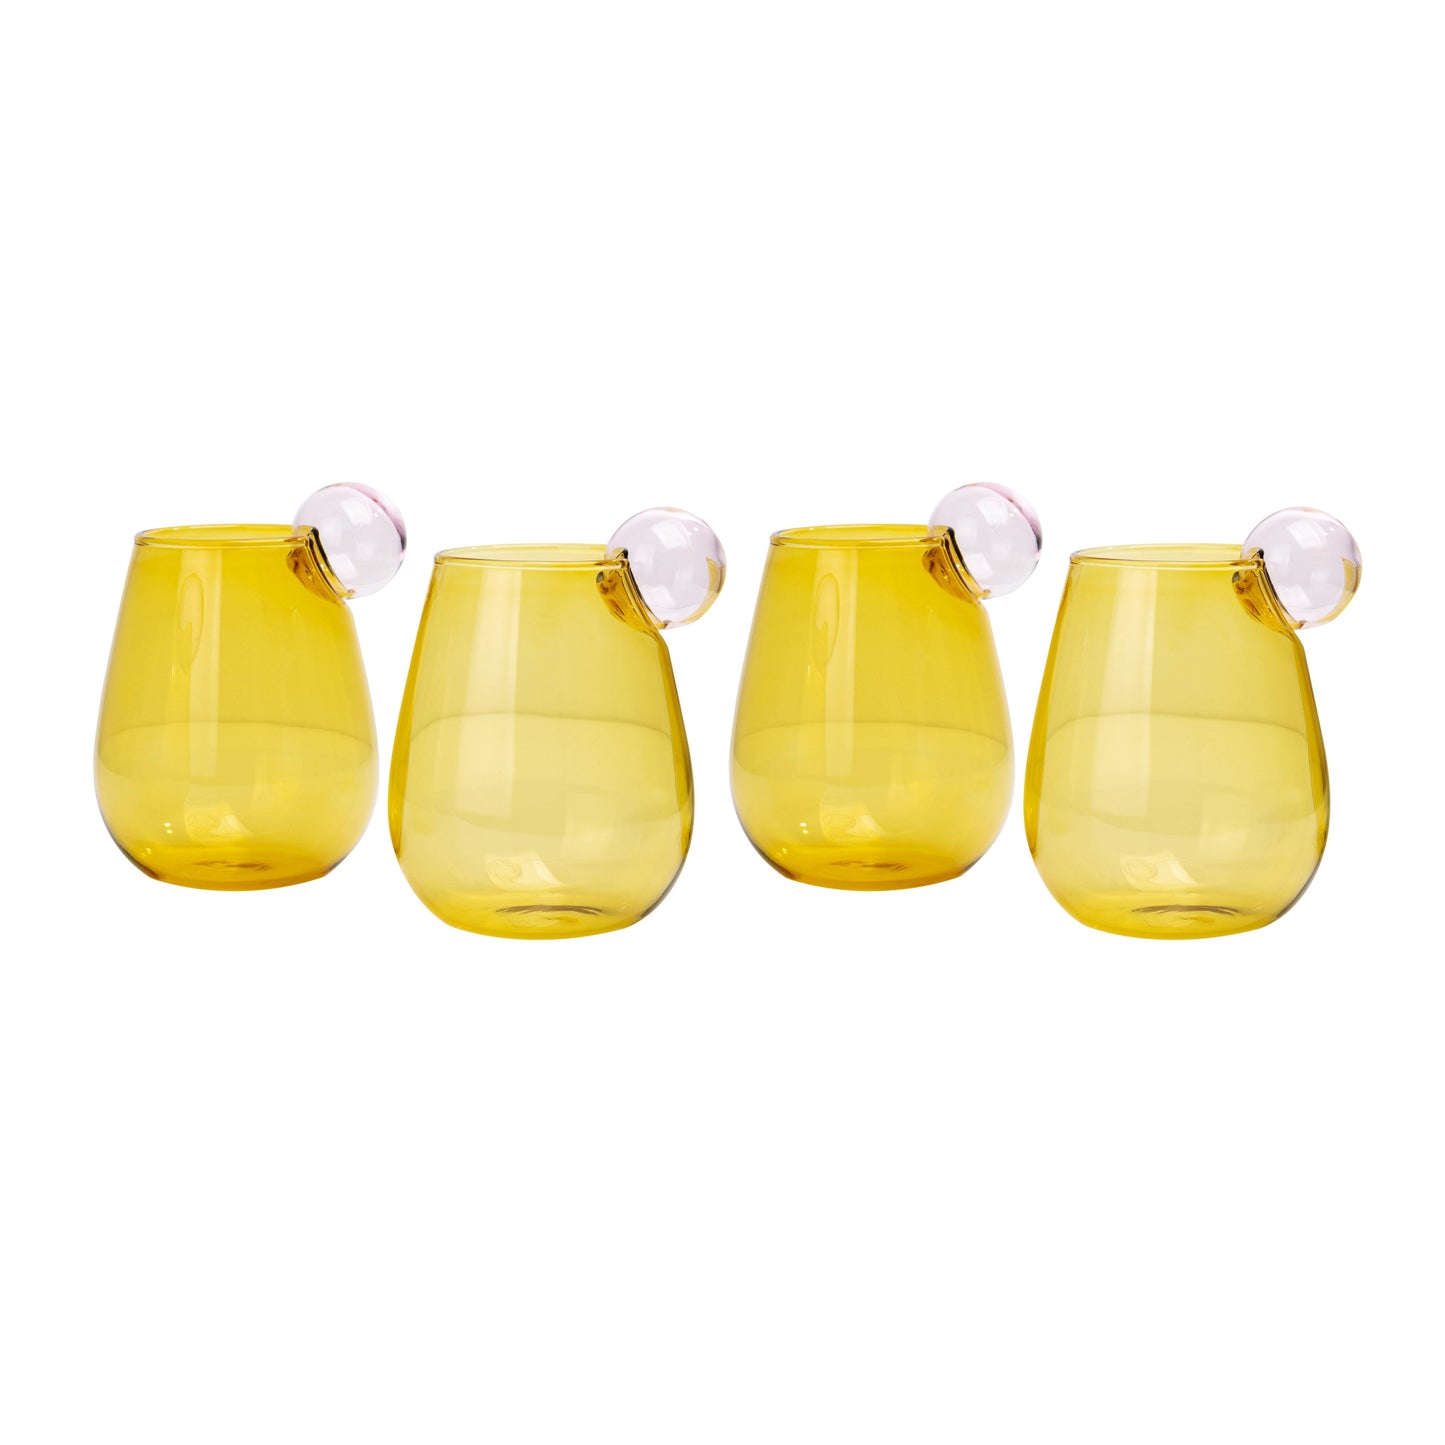 violette amber water glass - set of 4